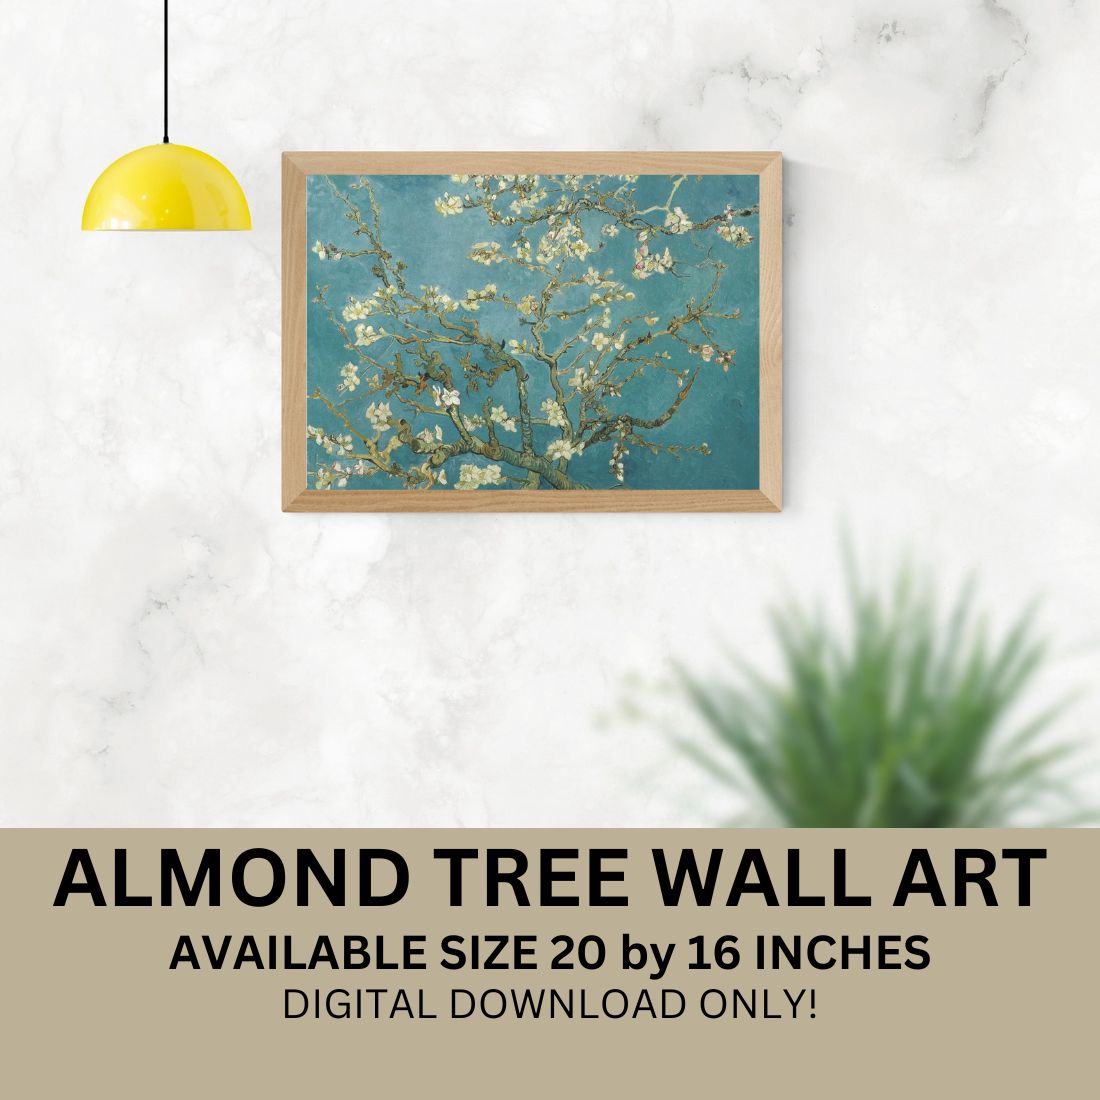 Almond Tree Wall Art cover image.